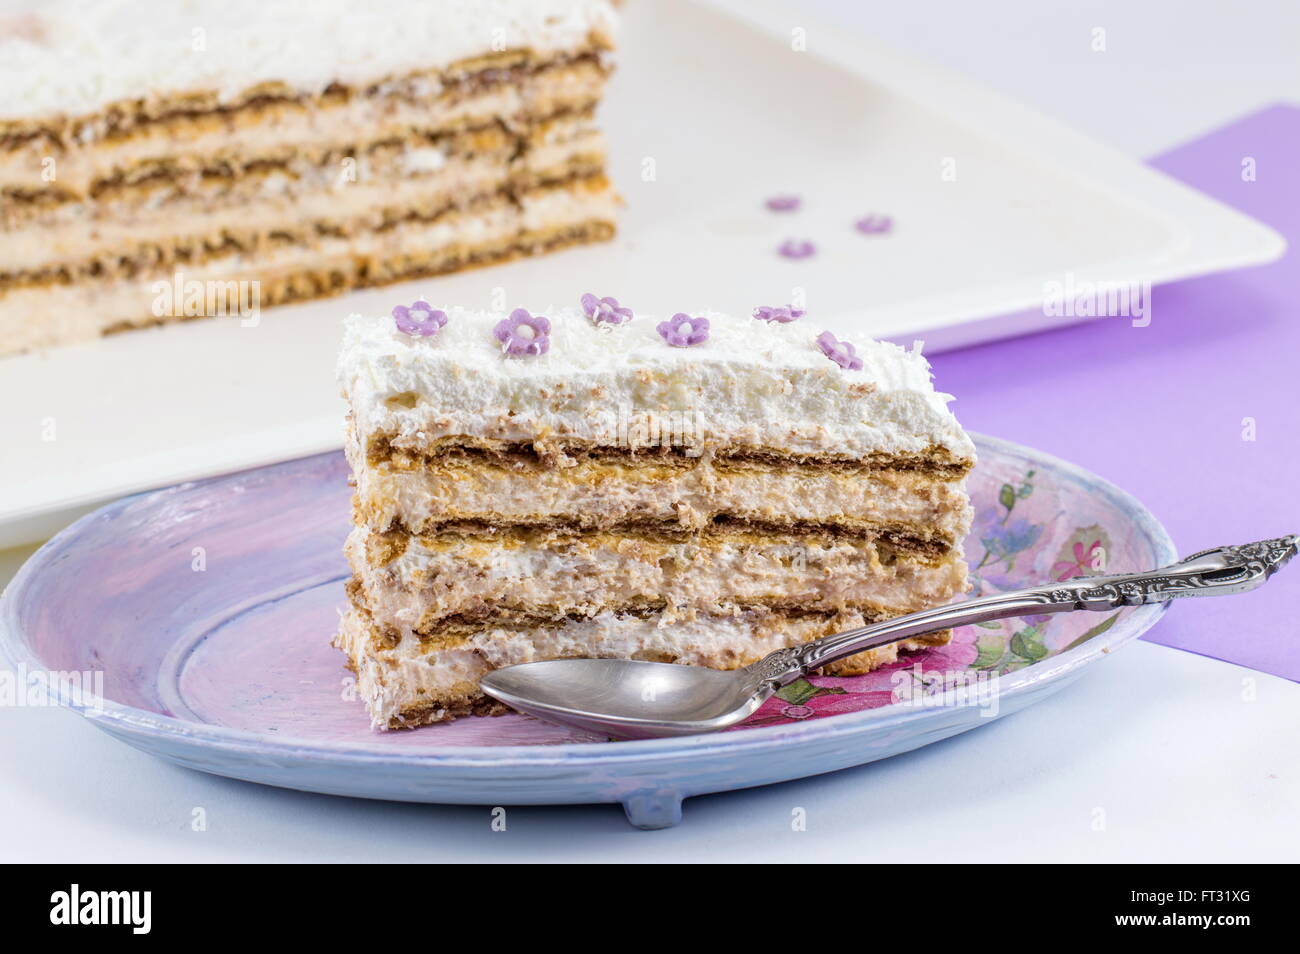 Slice of homemade cake made out of piled biscuits on a plate Stock Photo